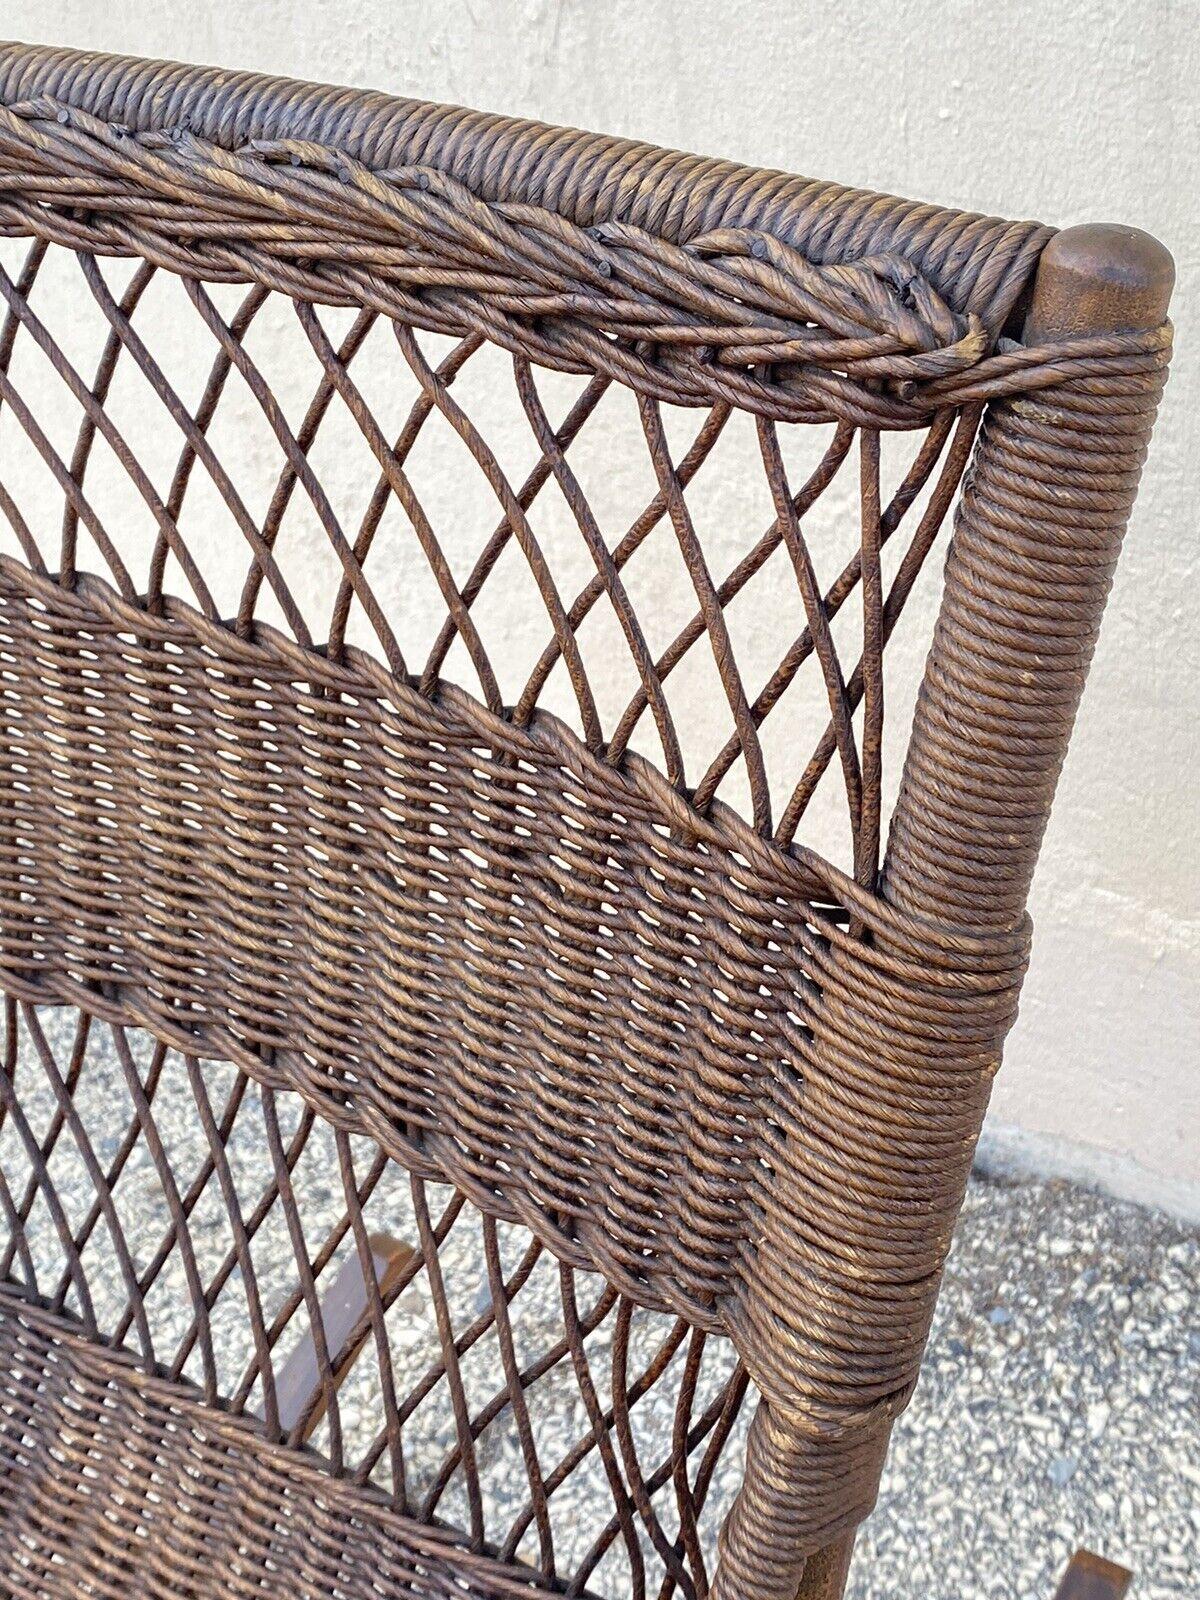 Antique Wicker and Rattan Wooden Victorian Rocking Chair Rocker For Sale 3